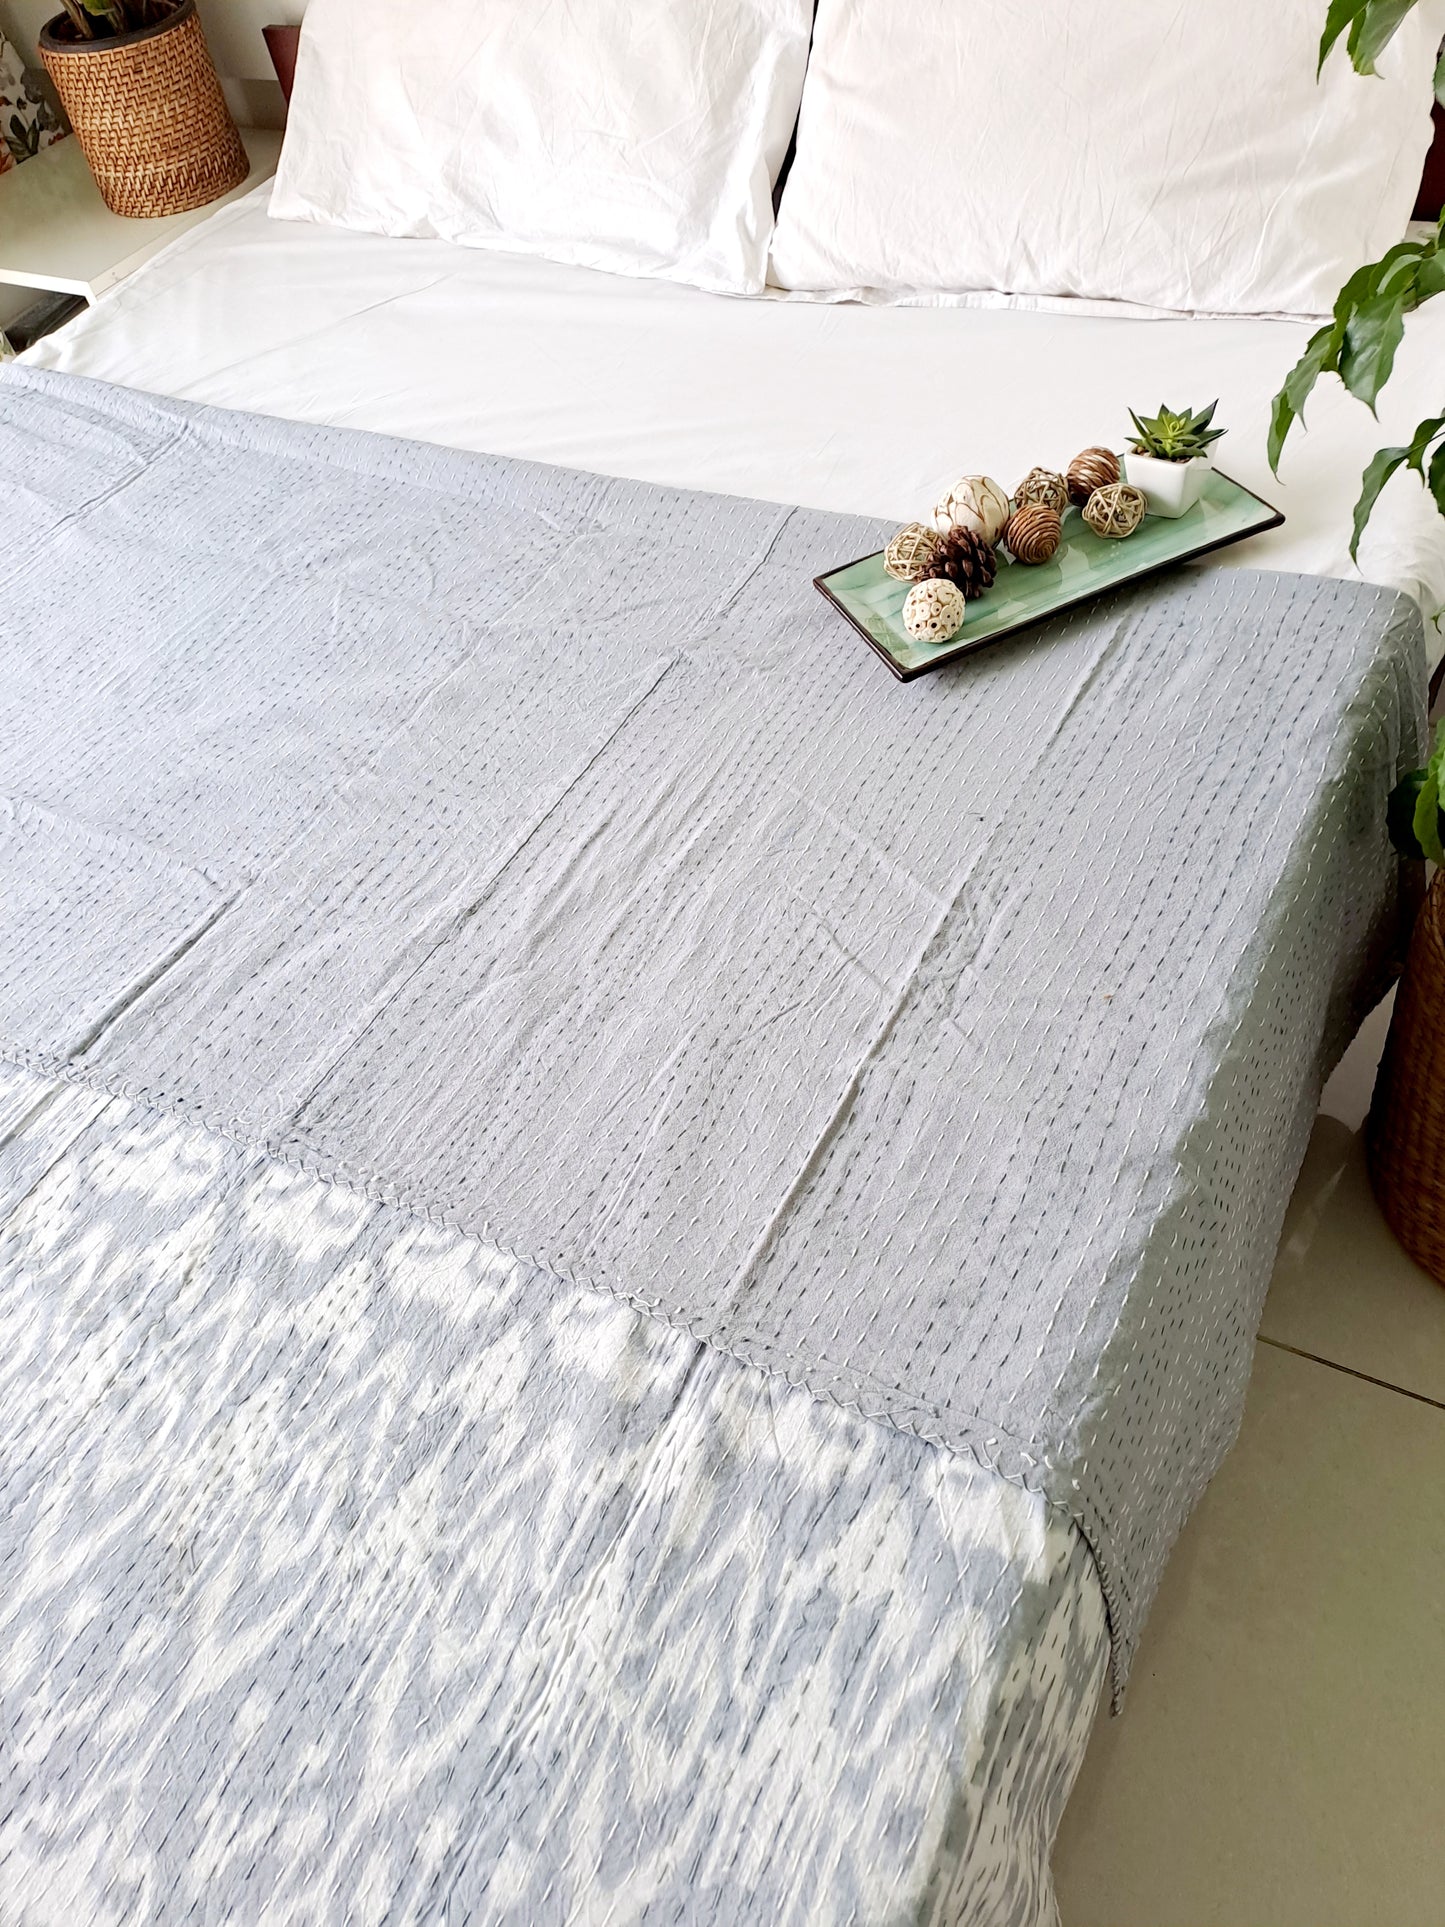 GREY KANTHA COTTON DOUBLE BED COVER